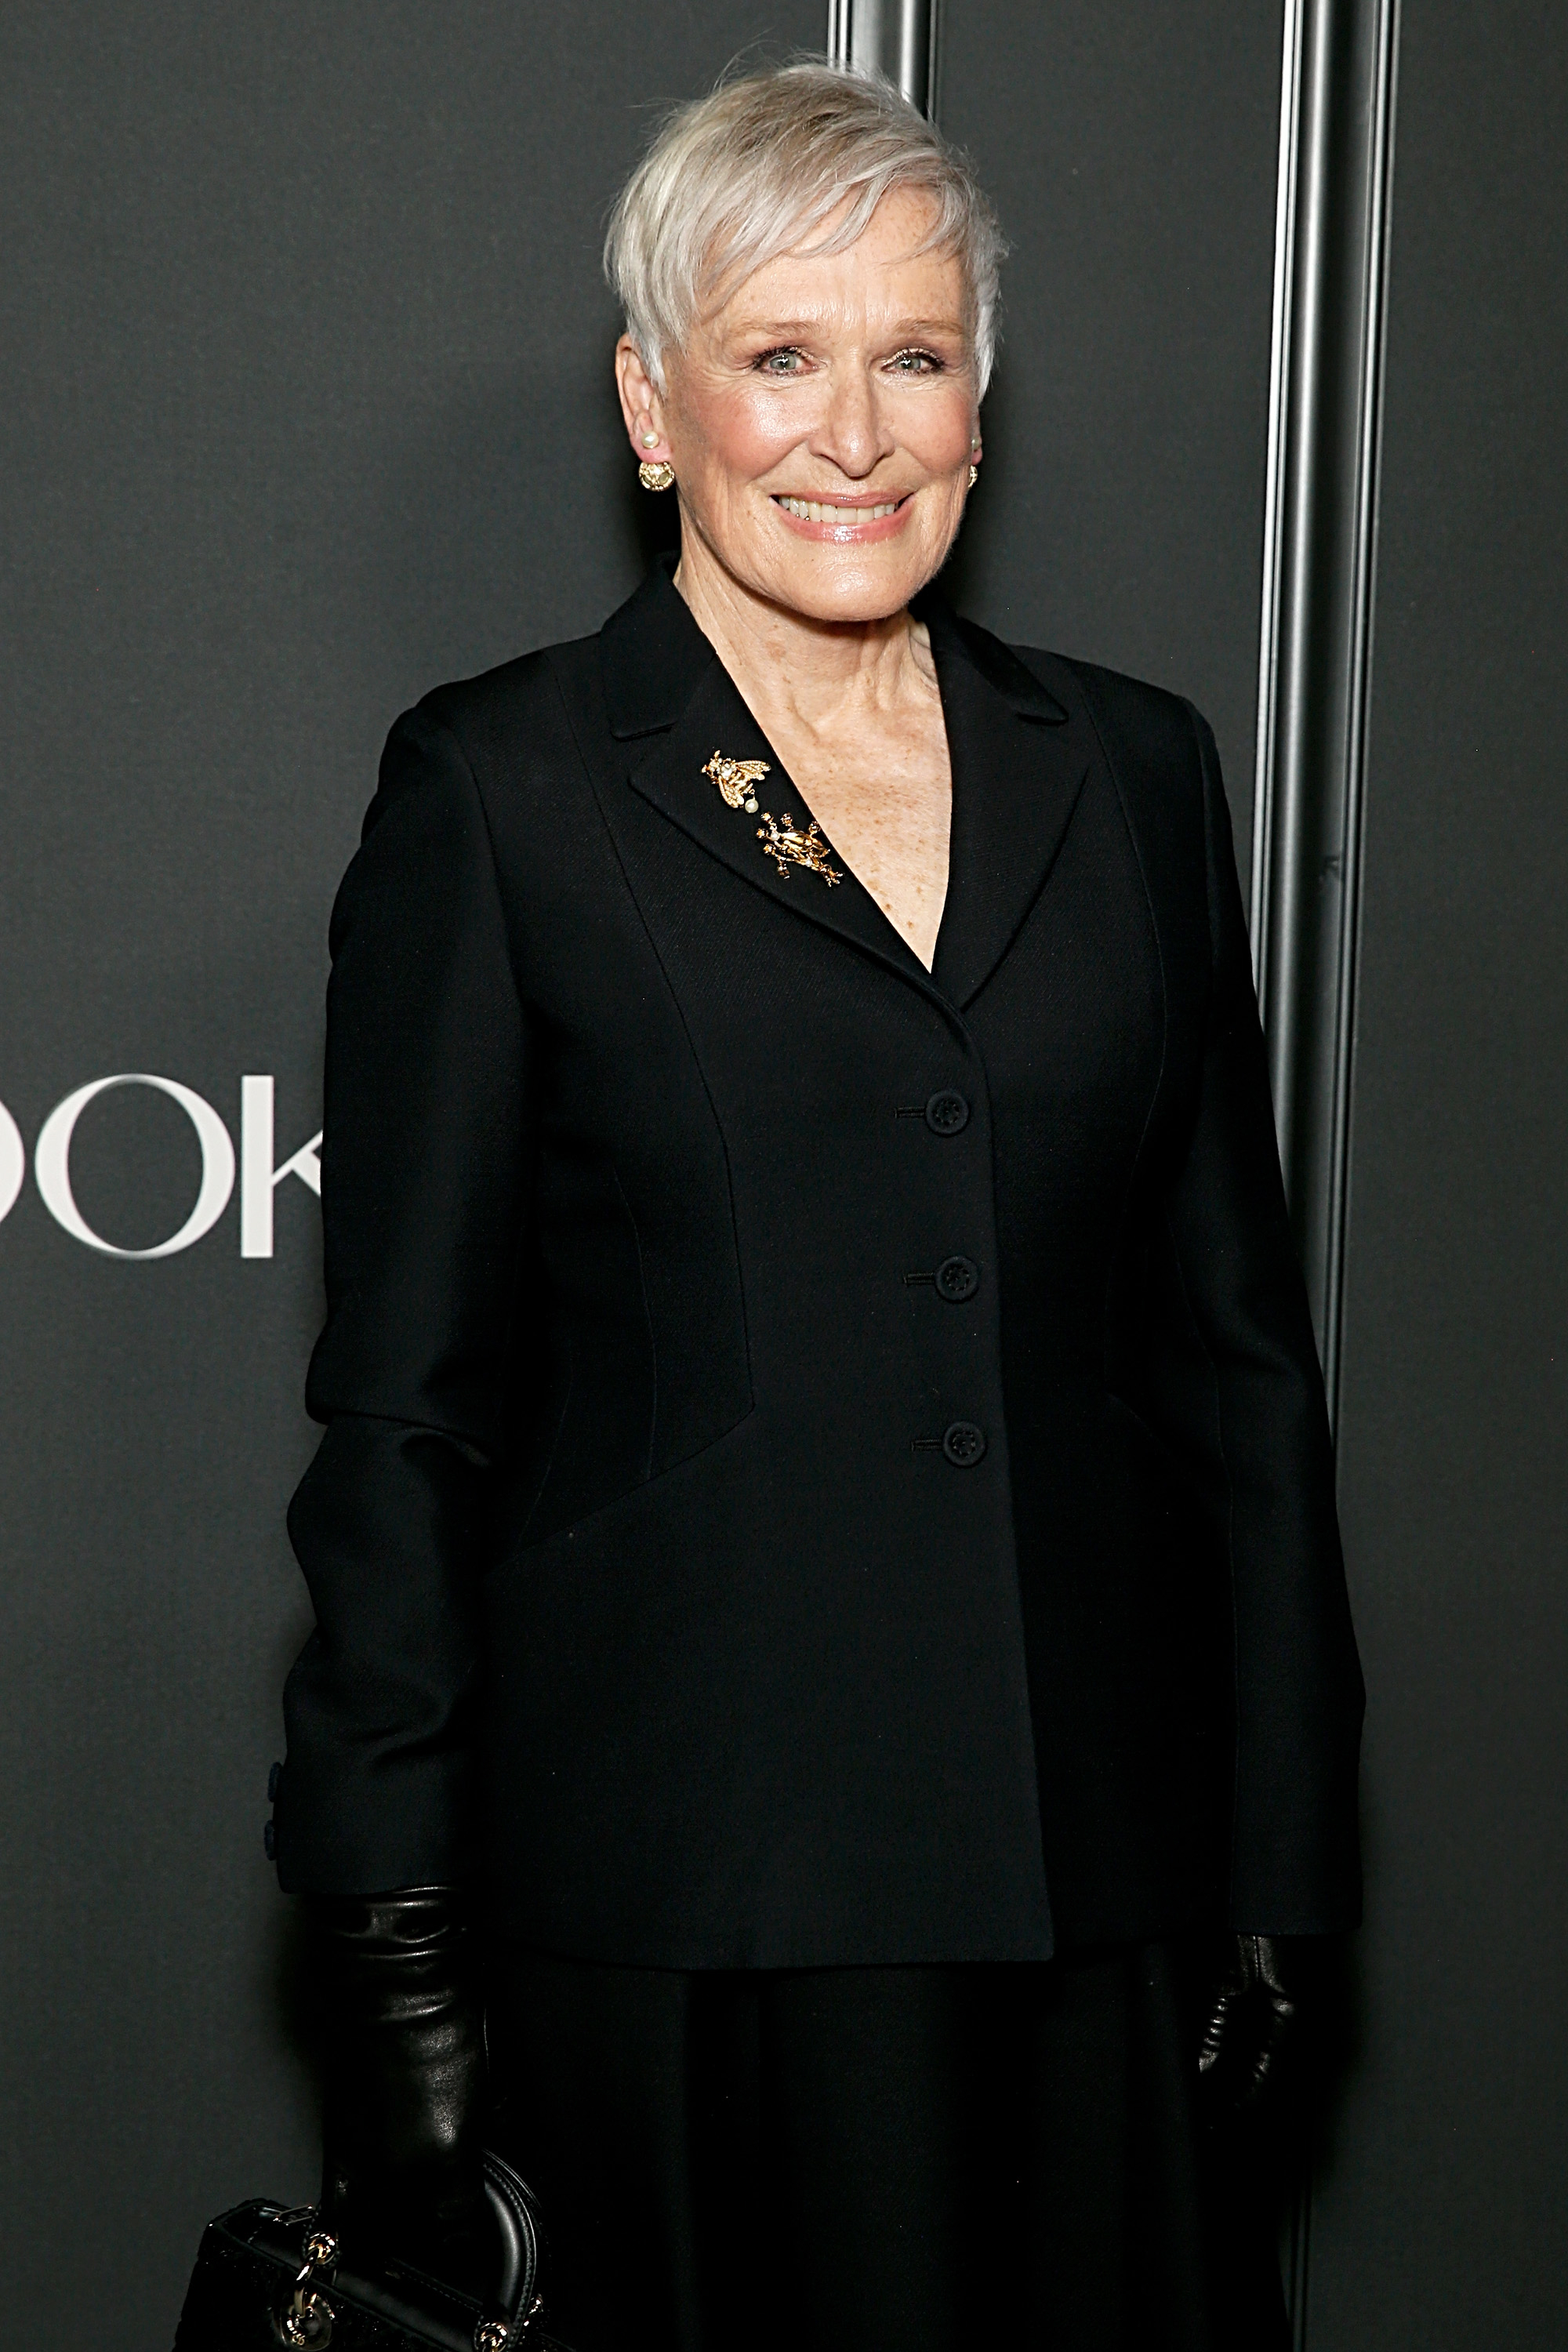 Glenn Close wearing a tailored black blazer, accessorized with a brooch, at an event